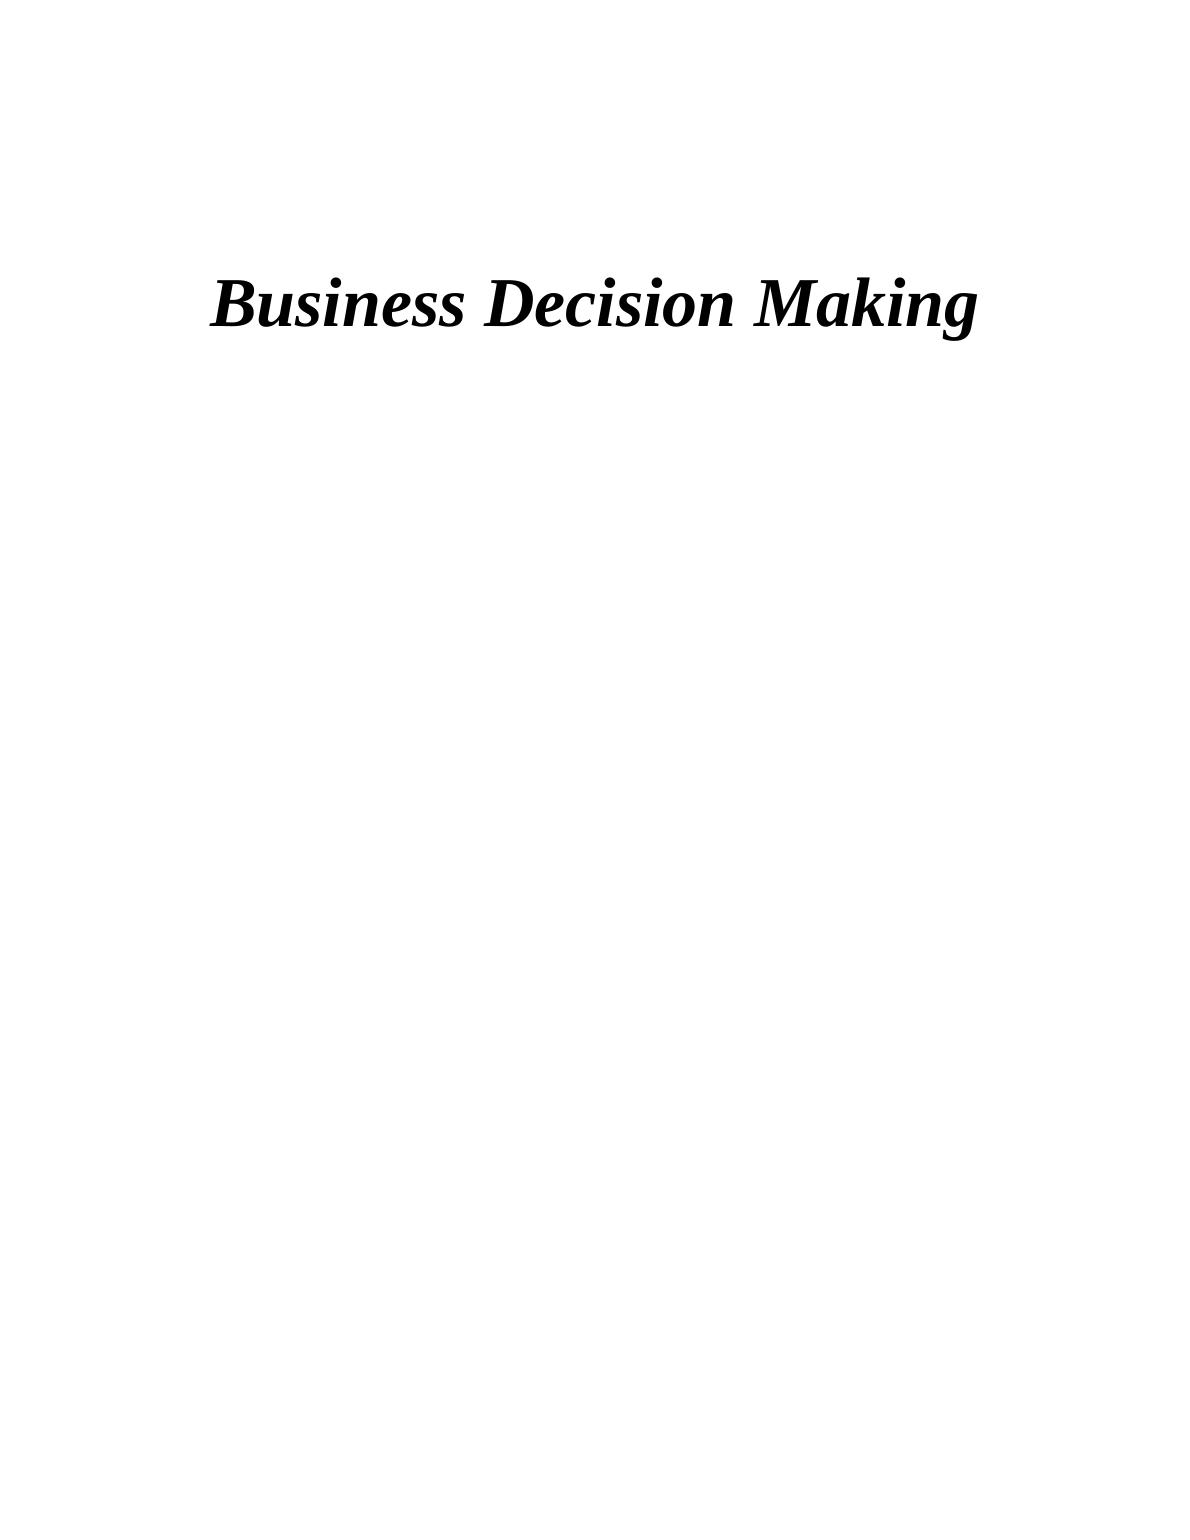 Business Decision Making Introduction to Step 1 TASK 11_1